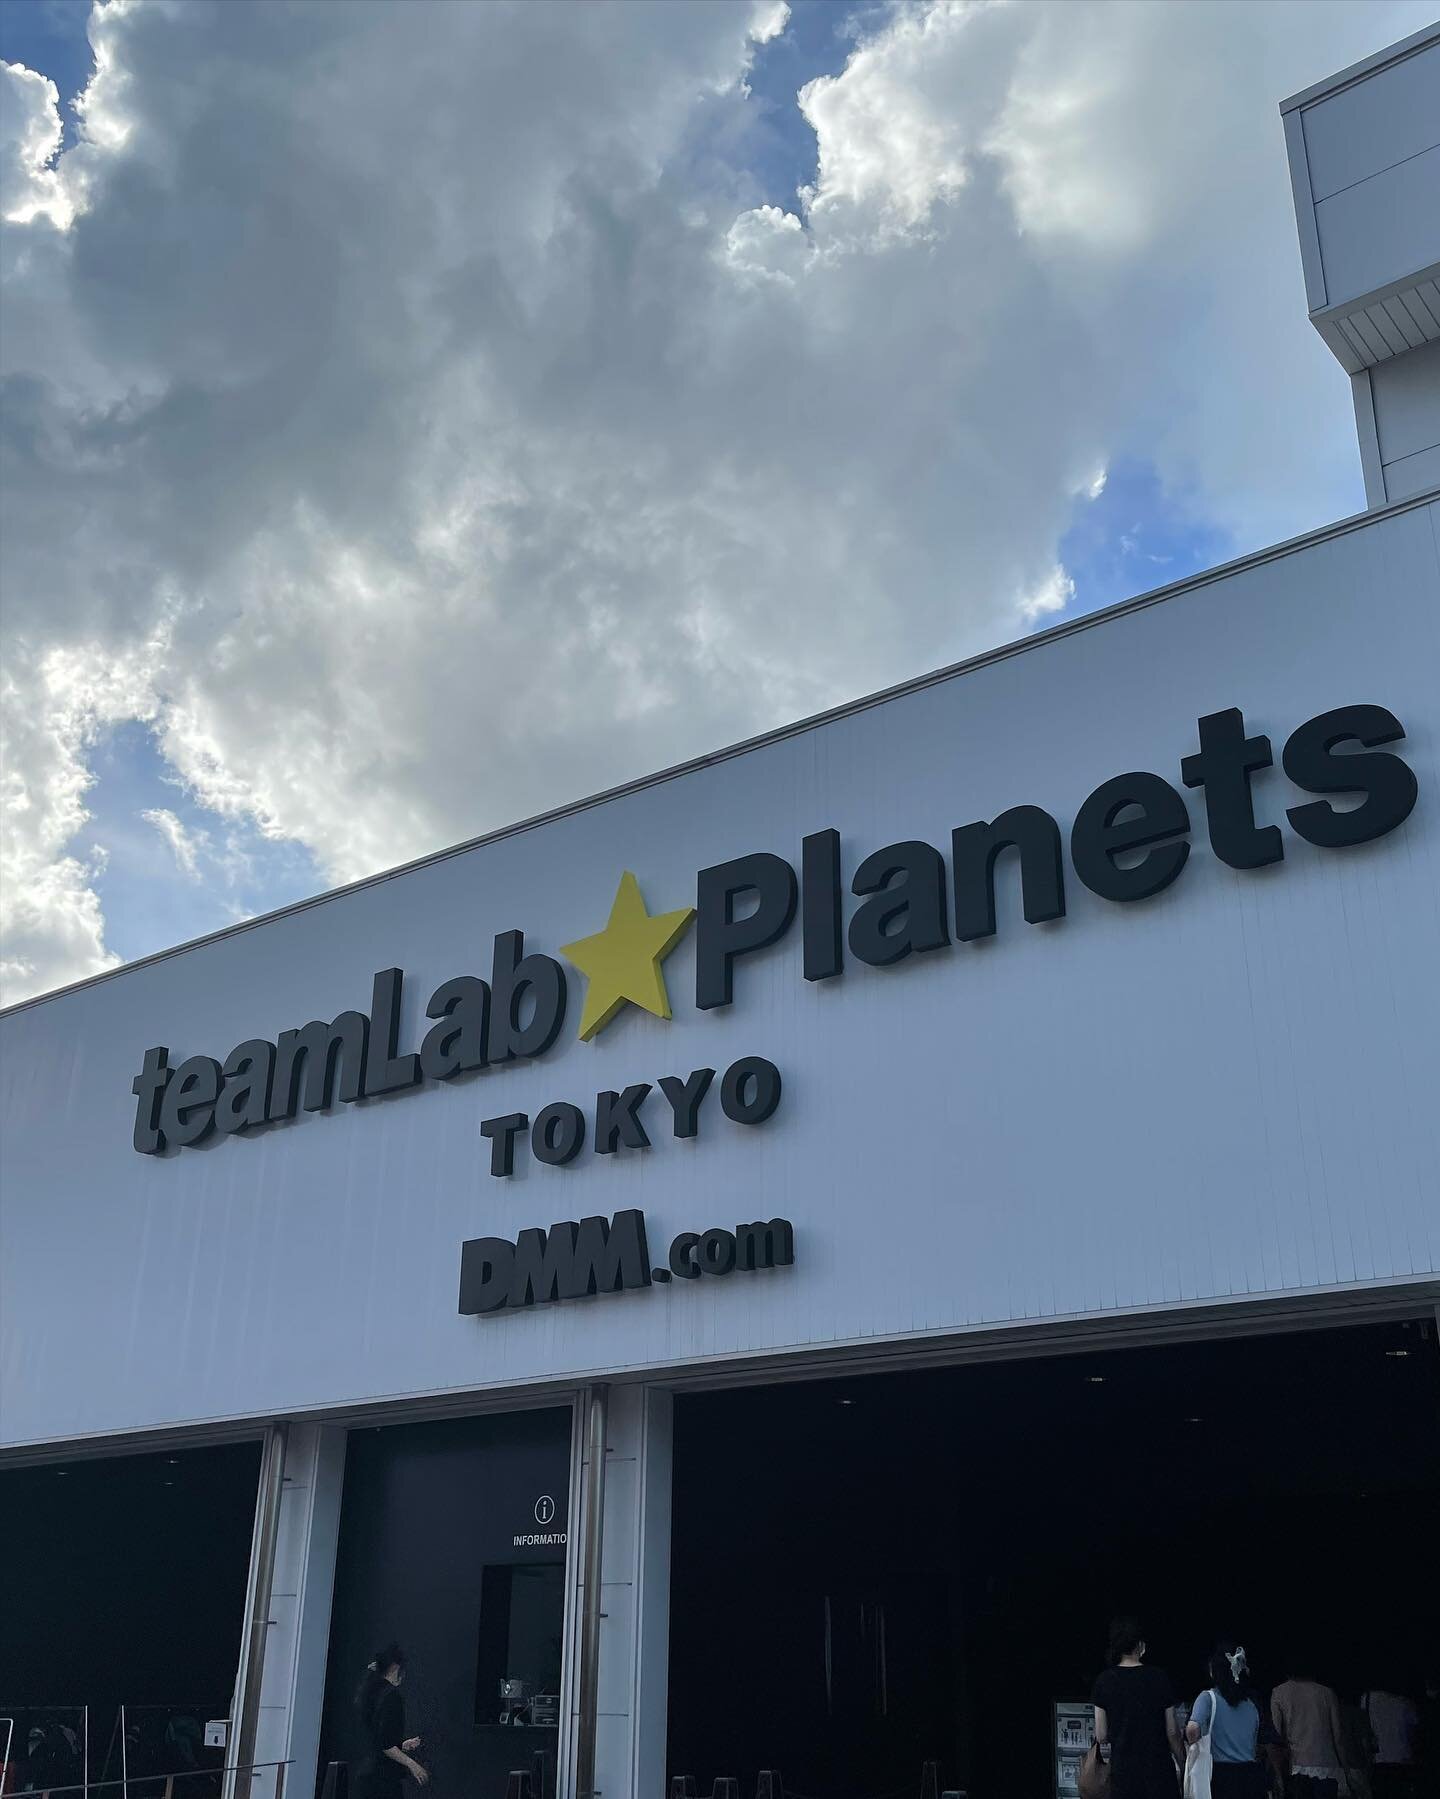 Had the chance on Wednesday to go to the #teamlabplanets exhibit in the #odaiba / #toyosu area of #tokyo #japan 

It was a fascinating#art #experience that was an #immersive journey through seemingly #liminalspace 

I highly recommend checking it out